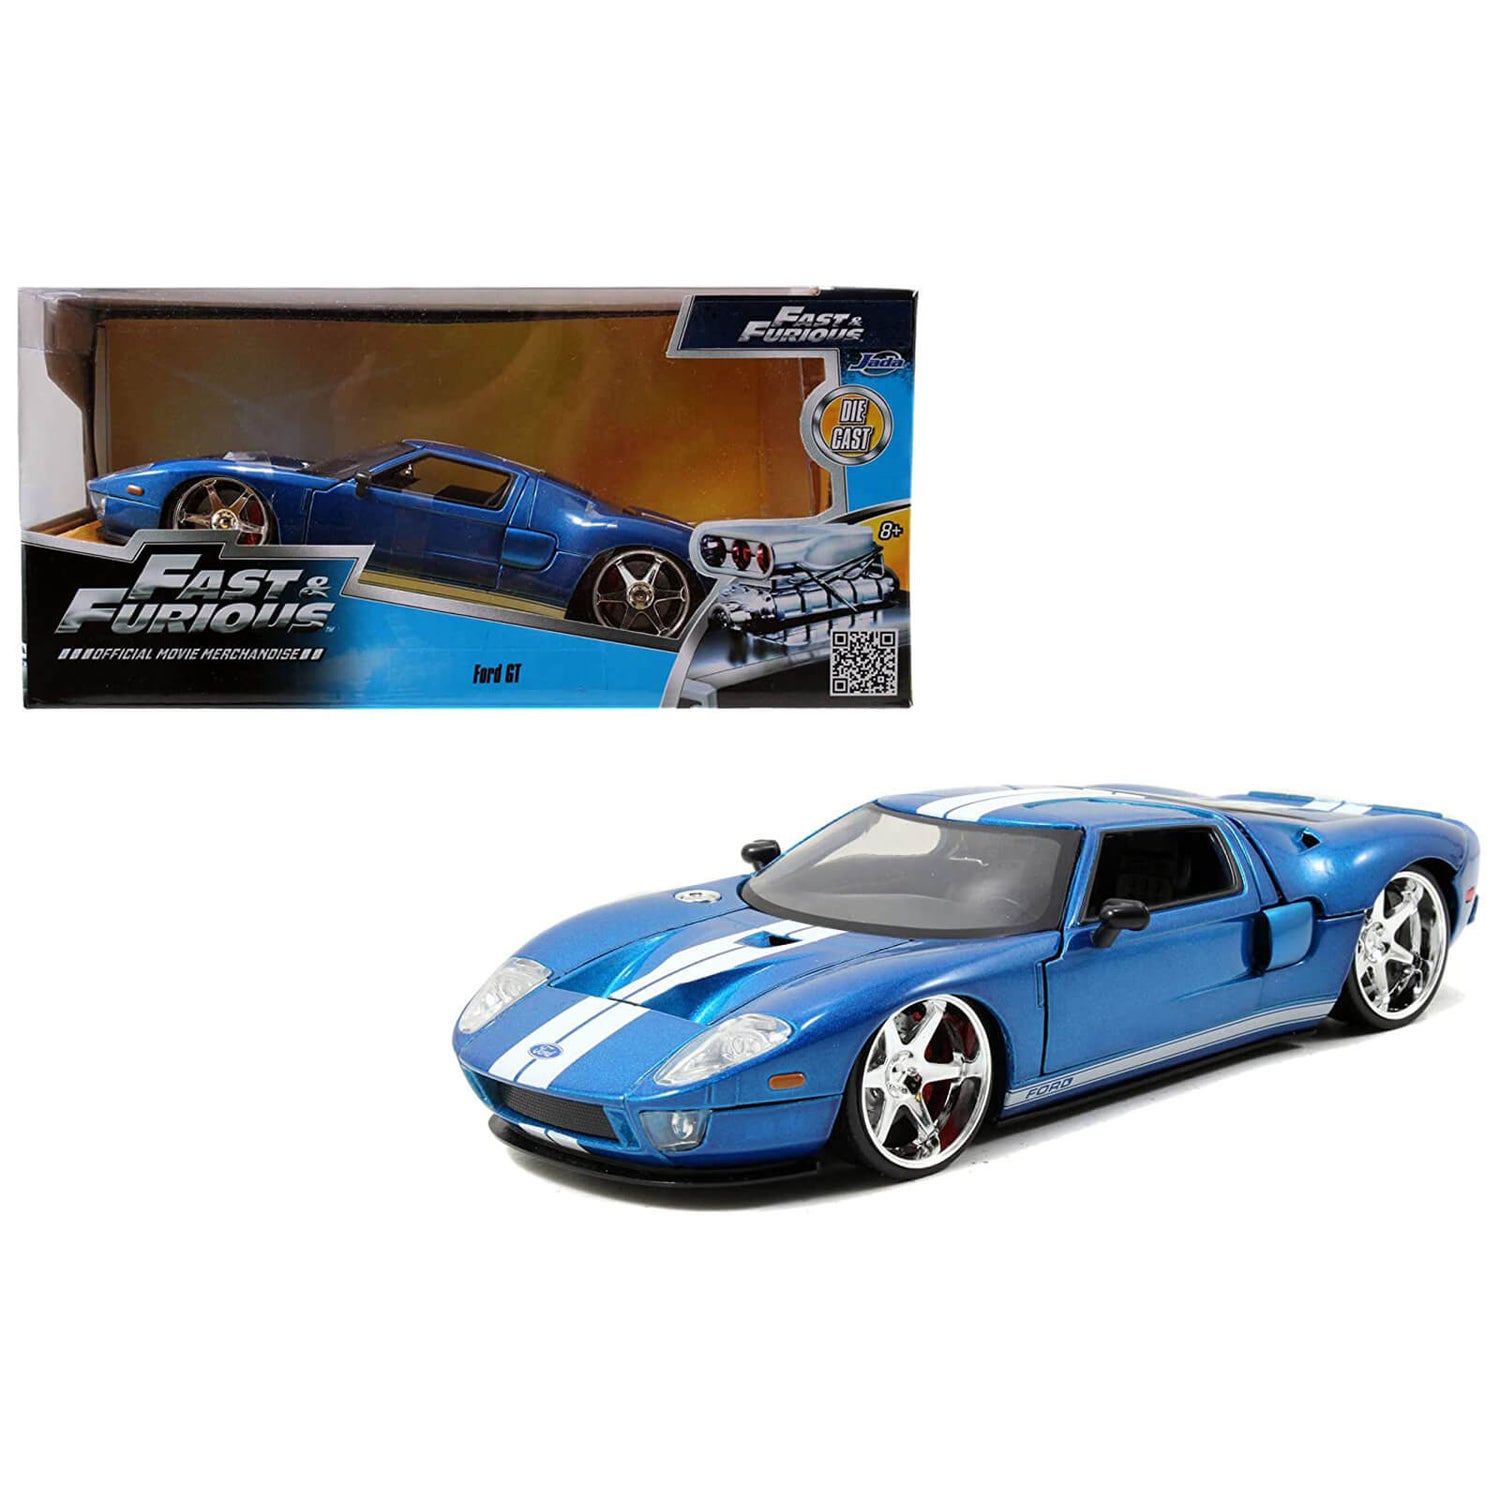 Jada Toys Fast & Furious 2005 Ford GT 1:24